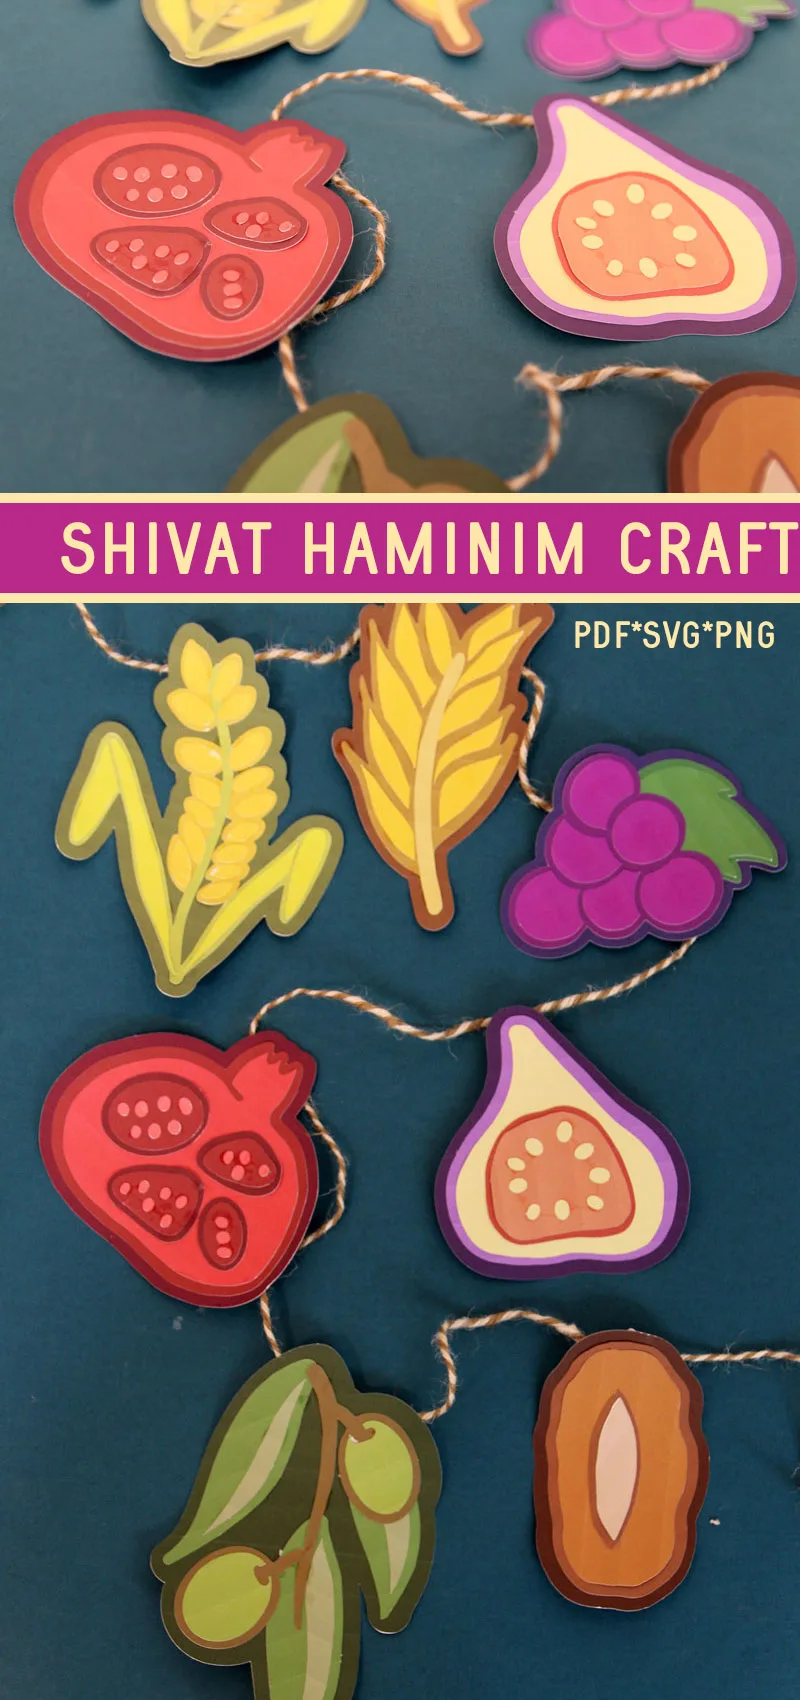 Craft a DIY Sukkah decoration and shivat haminim craft for Tu b'shvat. This Jewish SVG file and one of my favorite Jewish Cricut projects